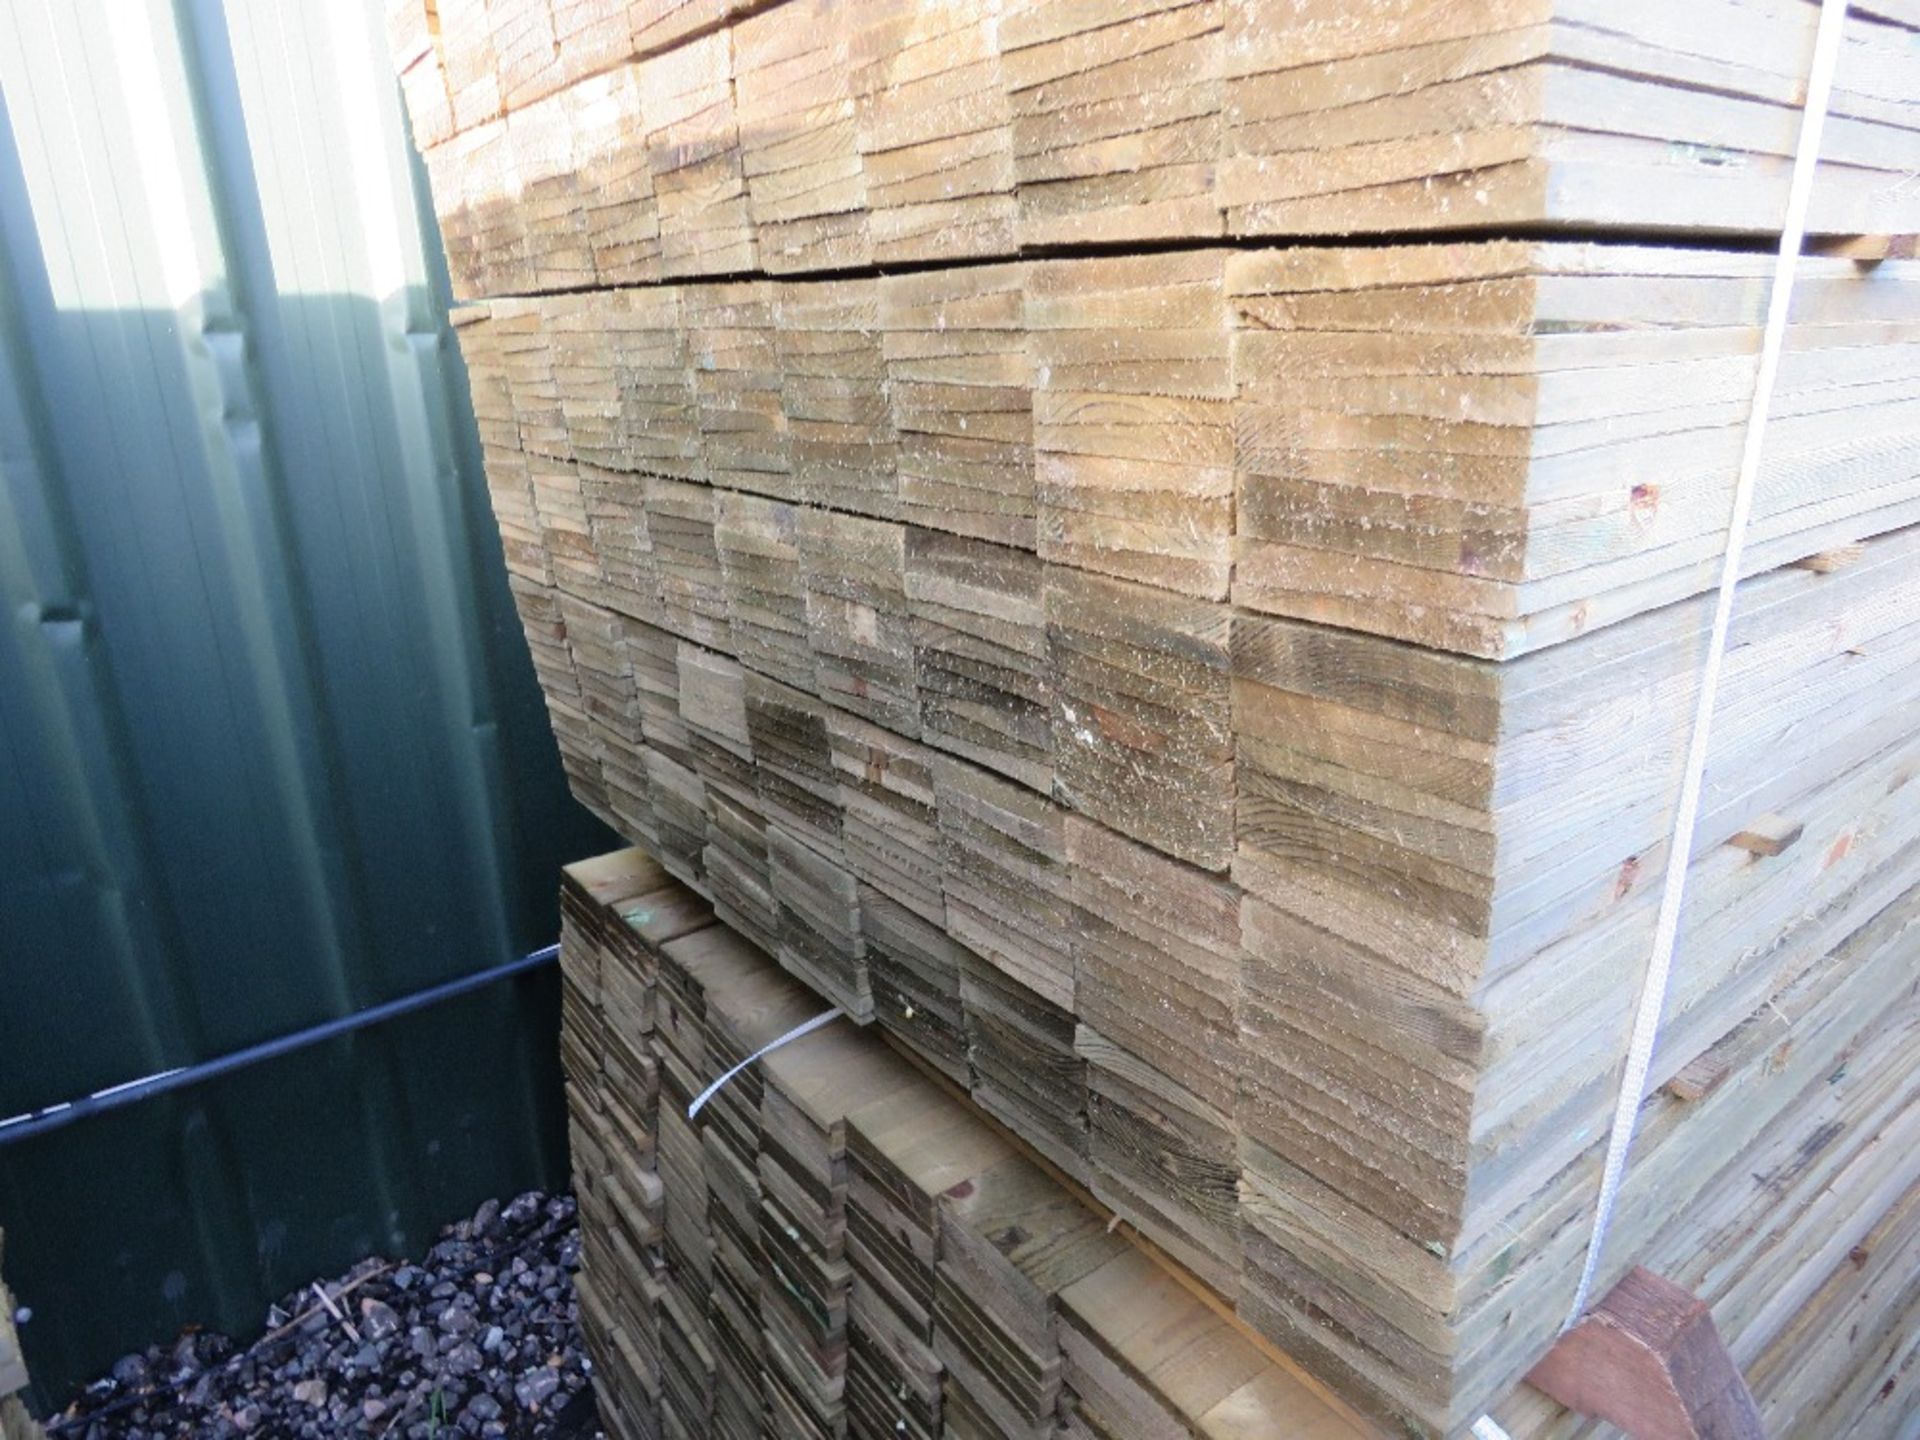 LARGE PACK OF PRESSURE TREATED FEATHER EDGE CLADDING TIMBER BOARDS. 1.5M X 100MM APPROX. - Image 2 of 3